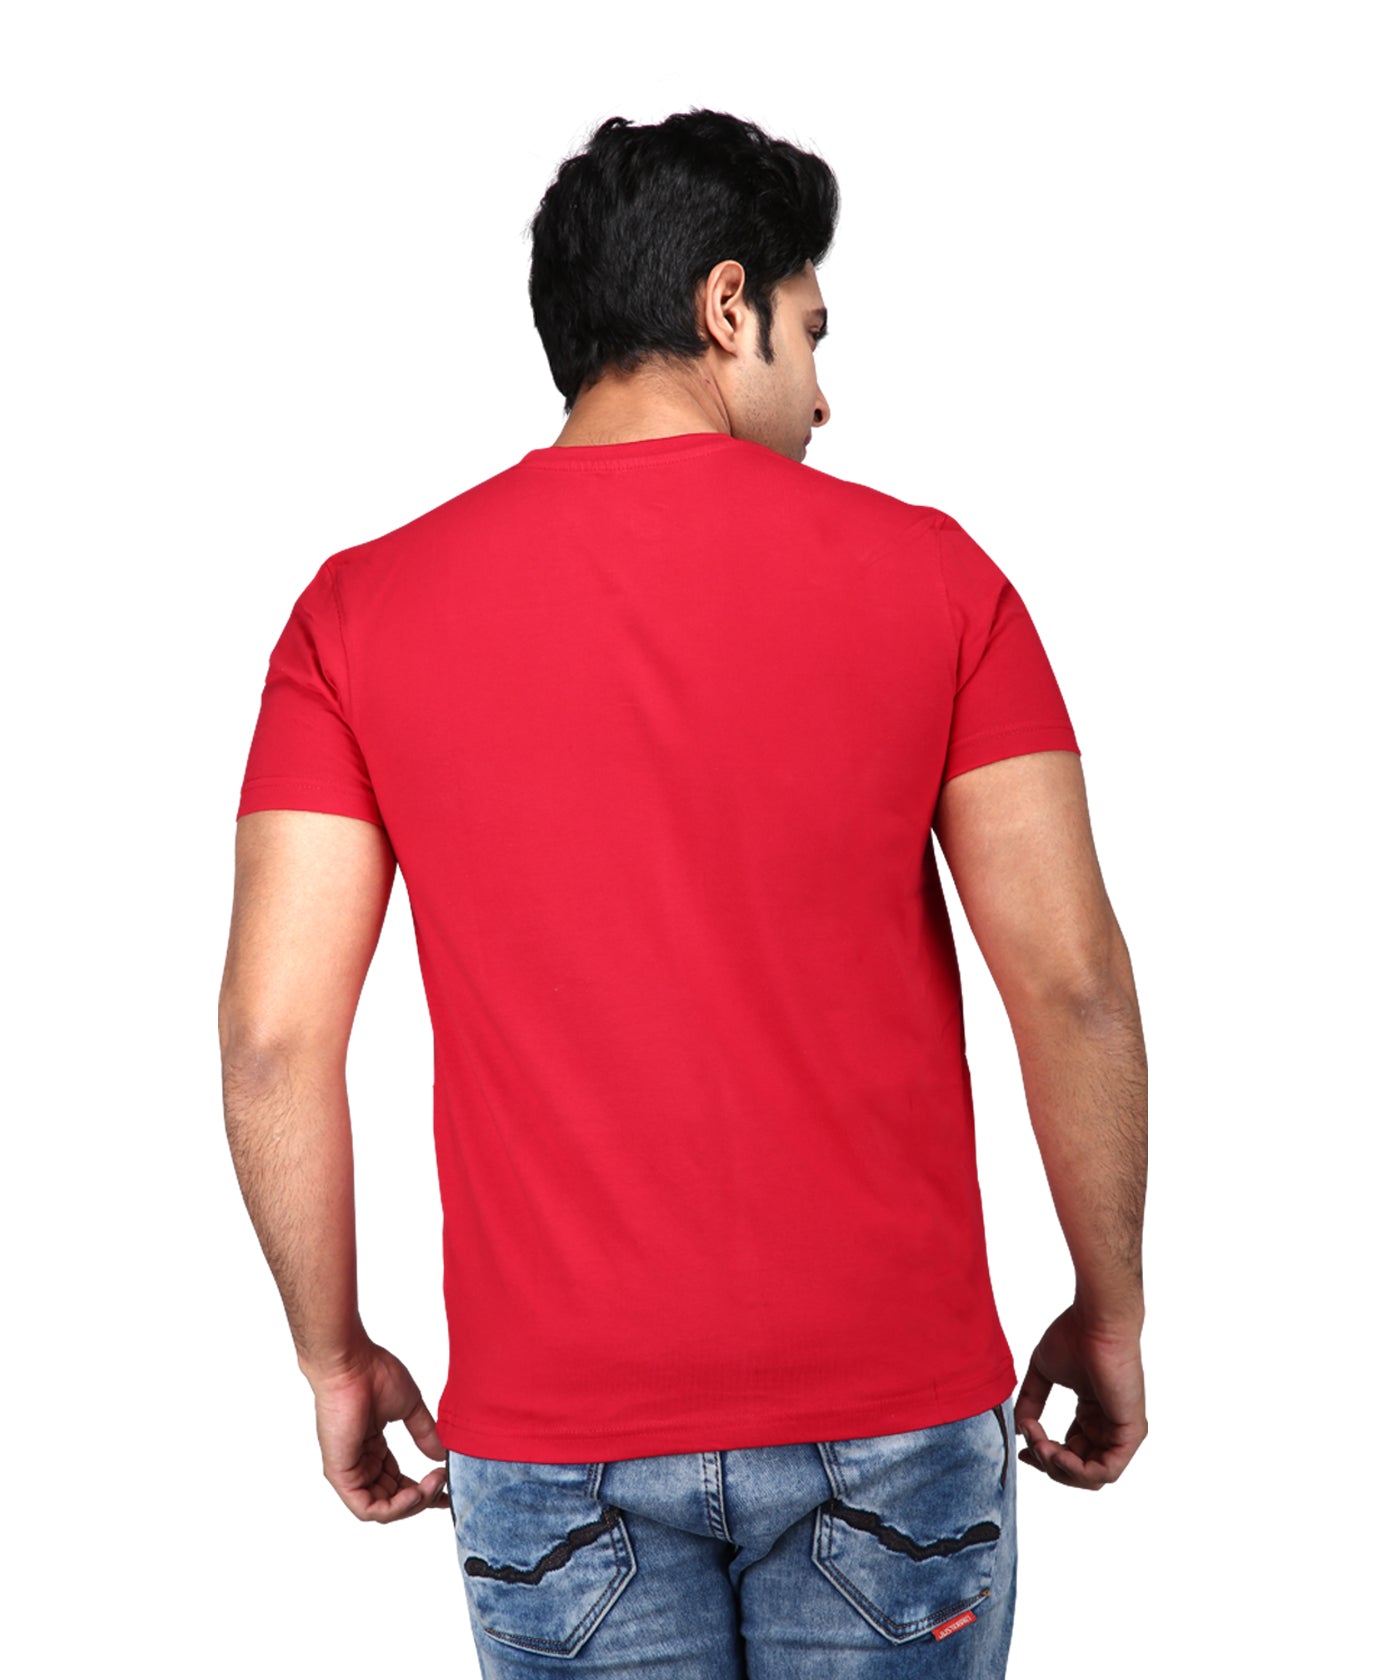 Keep Moving - Premium Round Neck Cotton Tees for Men - Navy Blue And Red